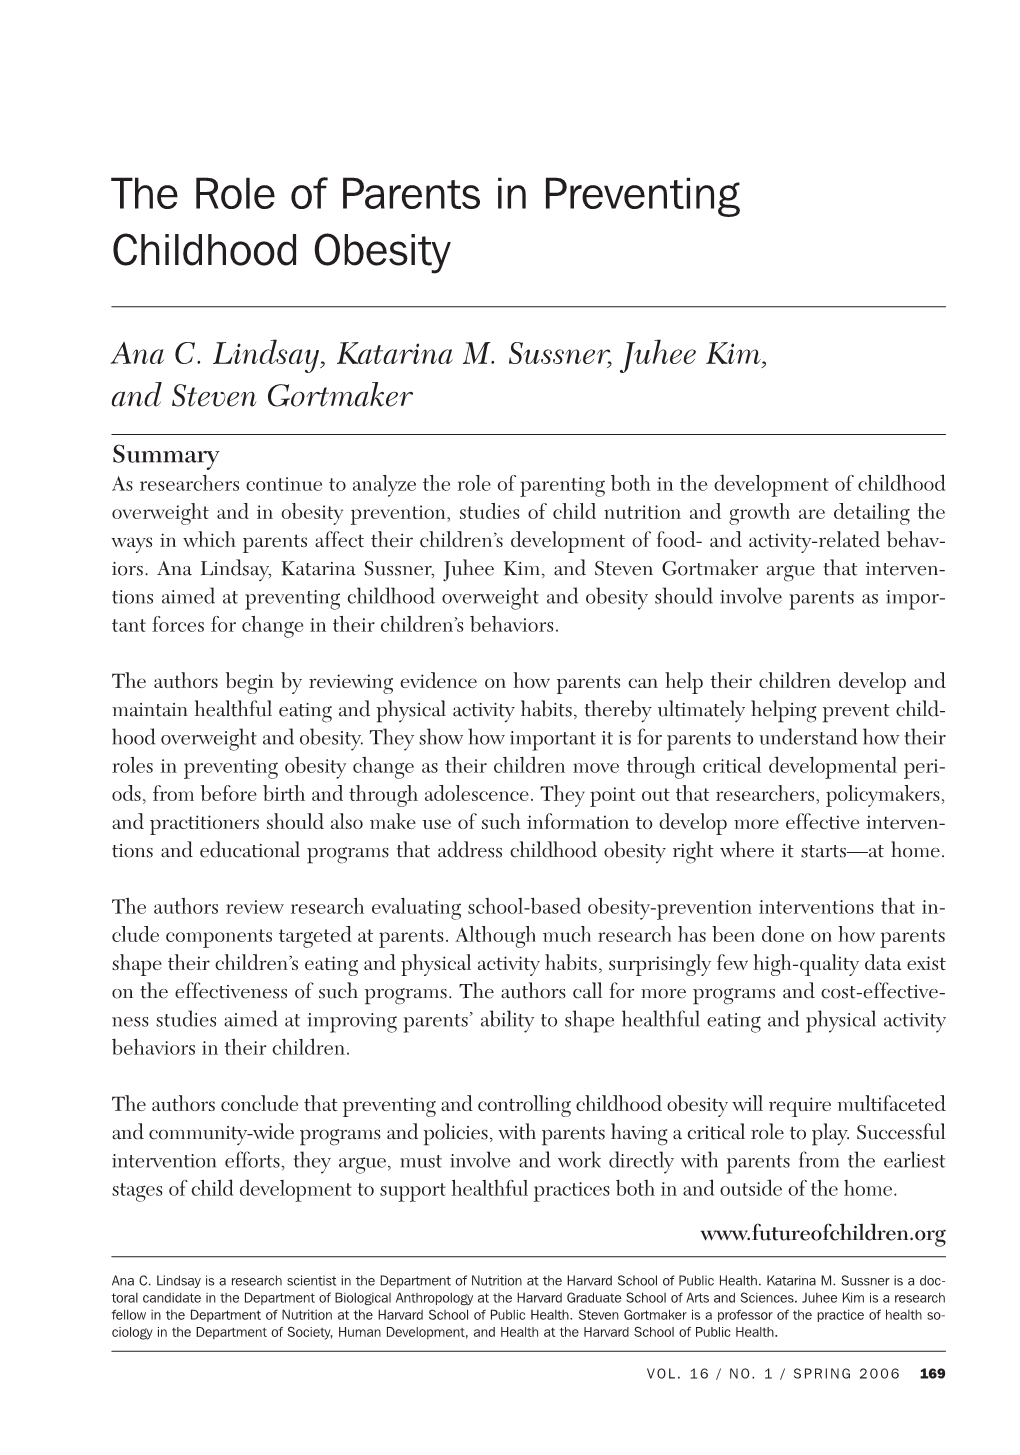 The Role of Parents in Preventing Childhood Obesity